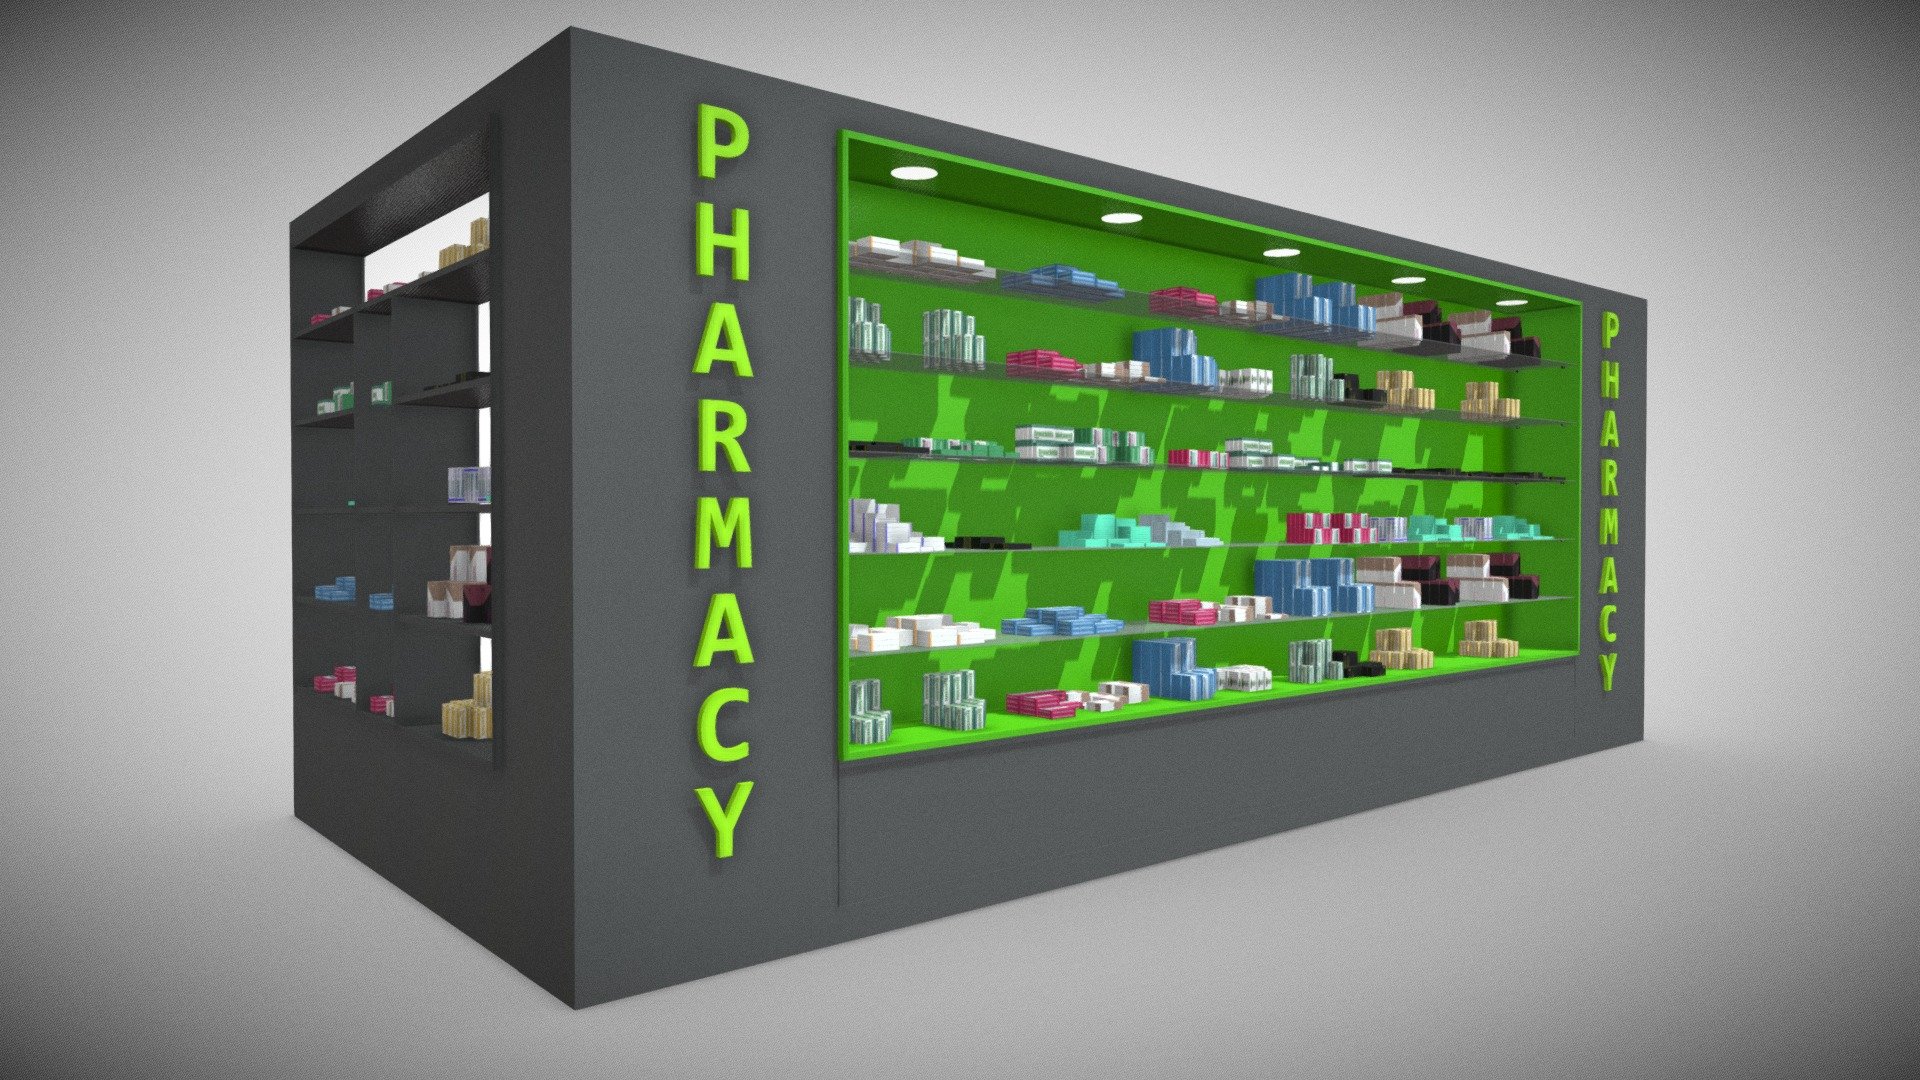 pharmacy decorative medicine cabinet can be an impressive element for your projects. realistic appearance and material, easy handling, low polygon 3d model